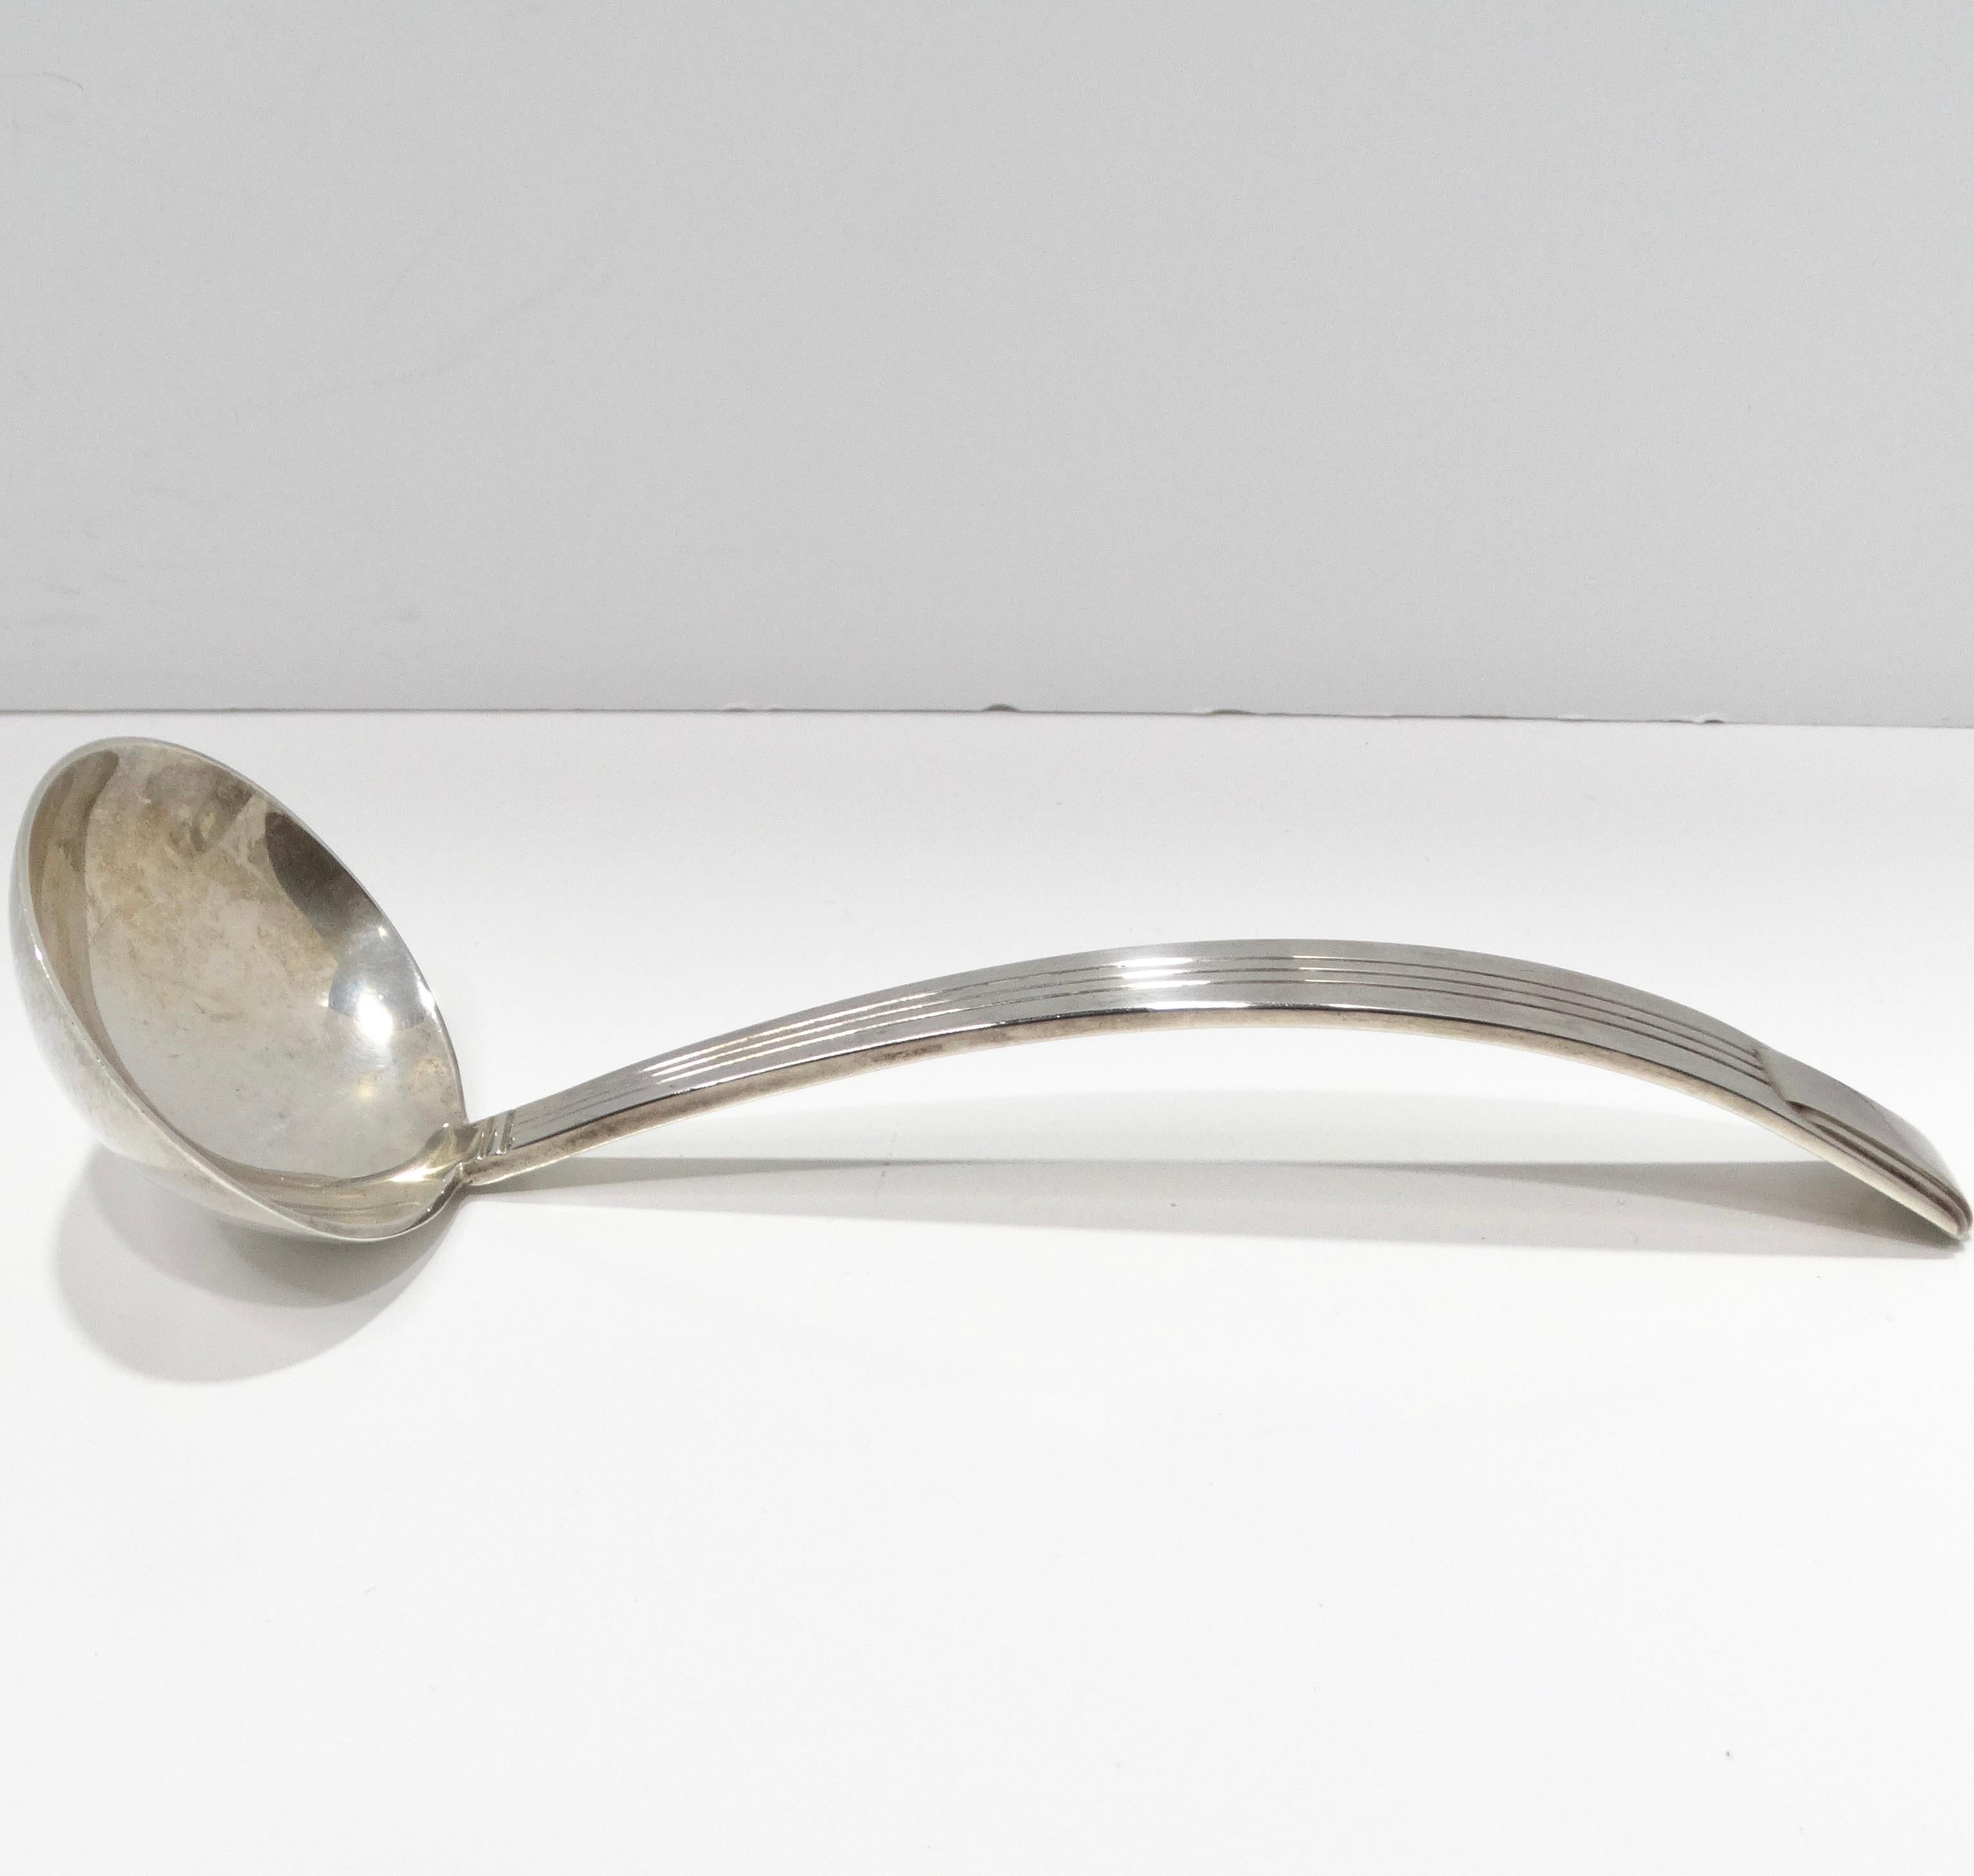 Tiffany & Co 1950s Silver Large Serving Spoon In Good Condition For Sale In Scottsdale, AZ